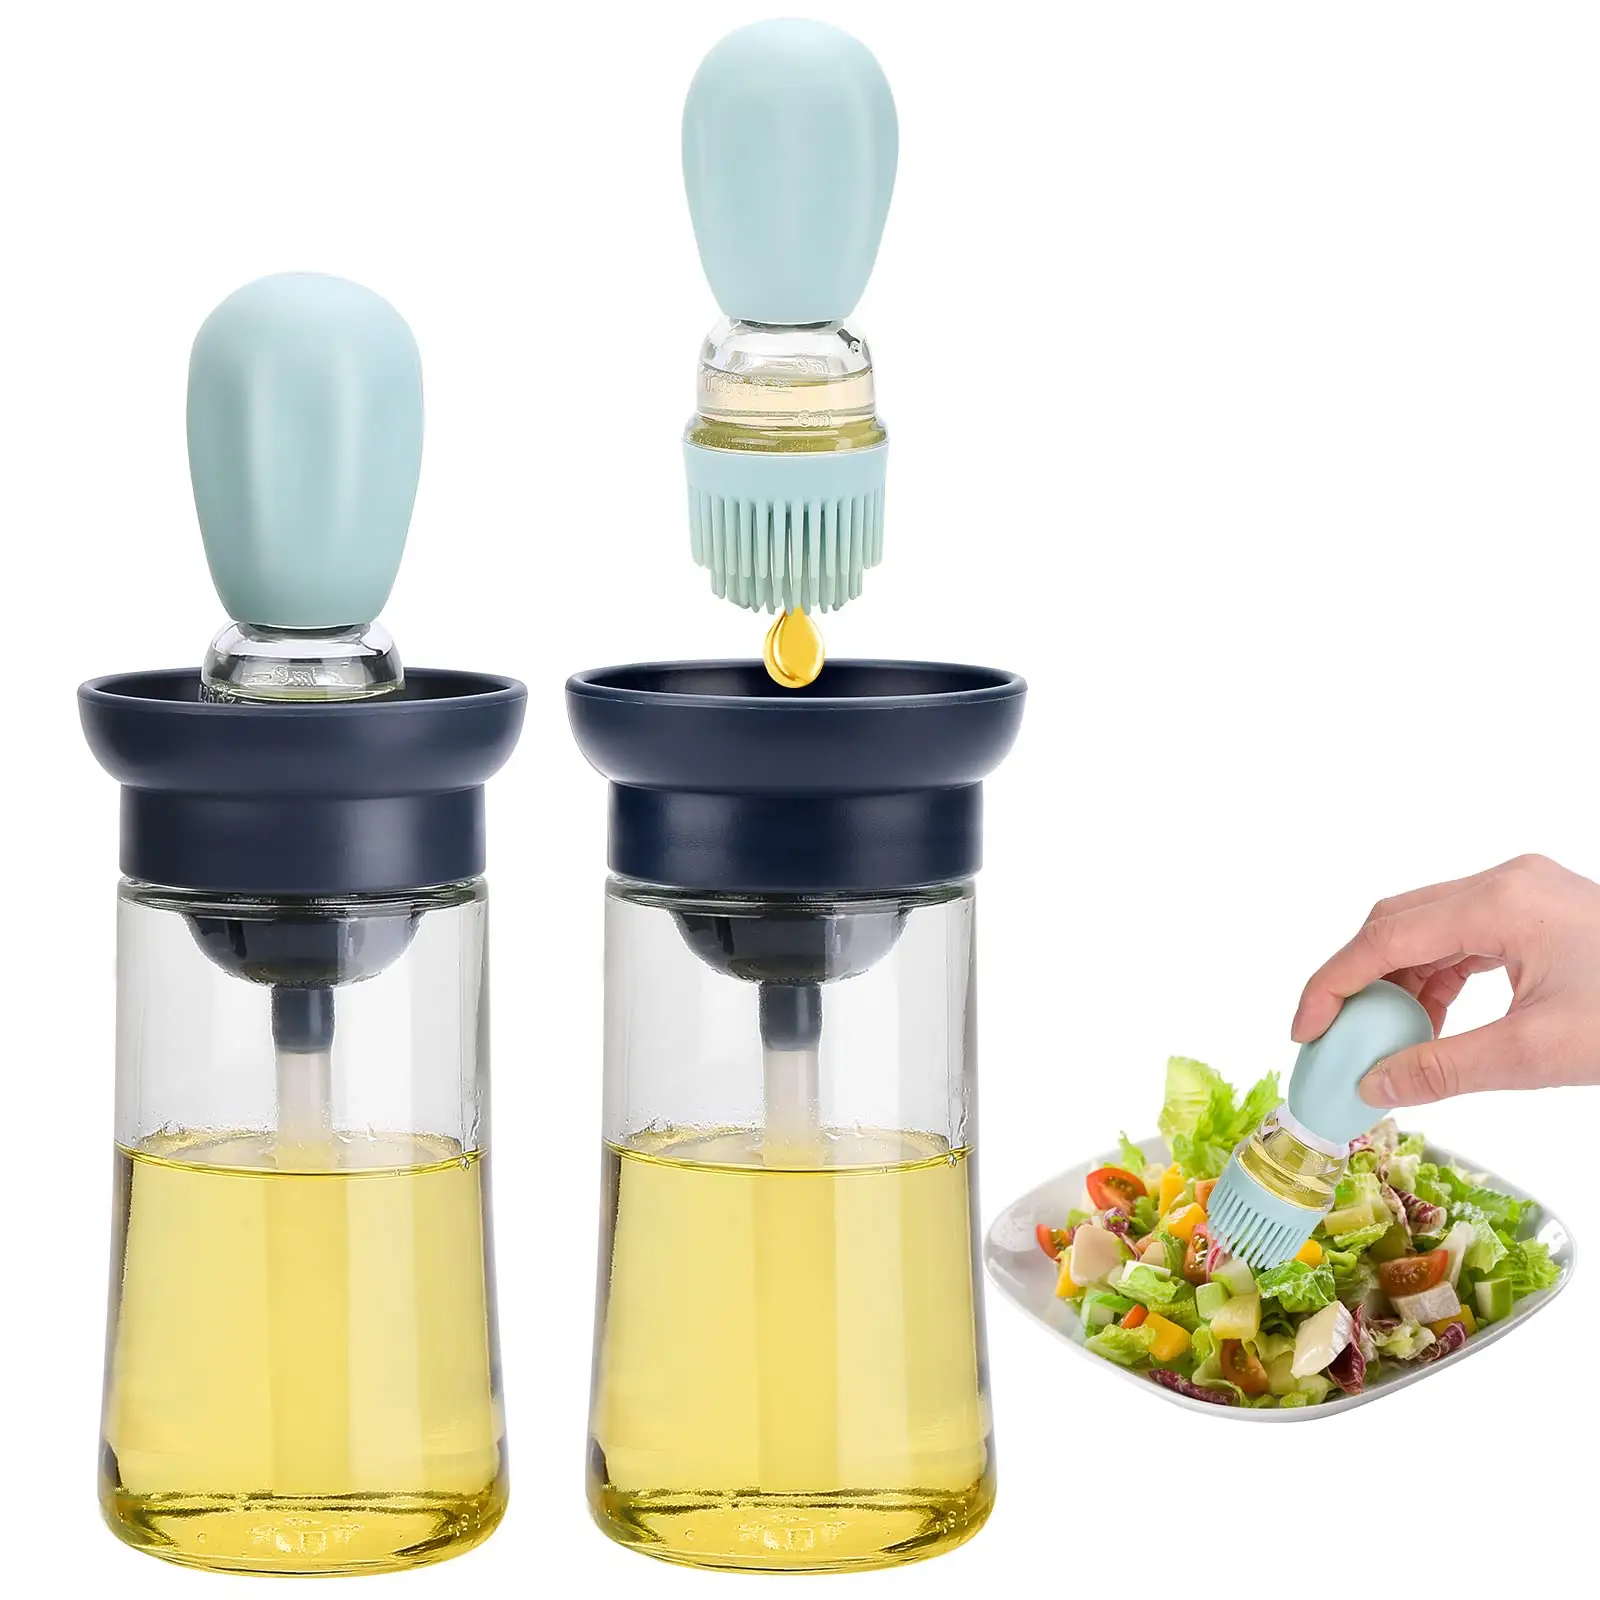 BBQ Baking Tools 2 in 1 Bottle Cooking Olive Oil Dispenser Glass Olive Oil Bottle With Silicone Brush